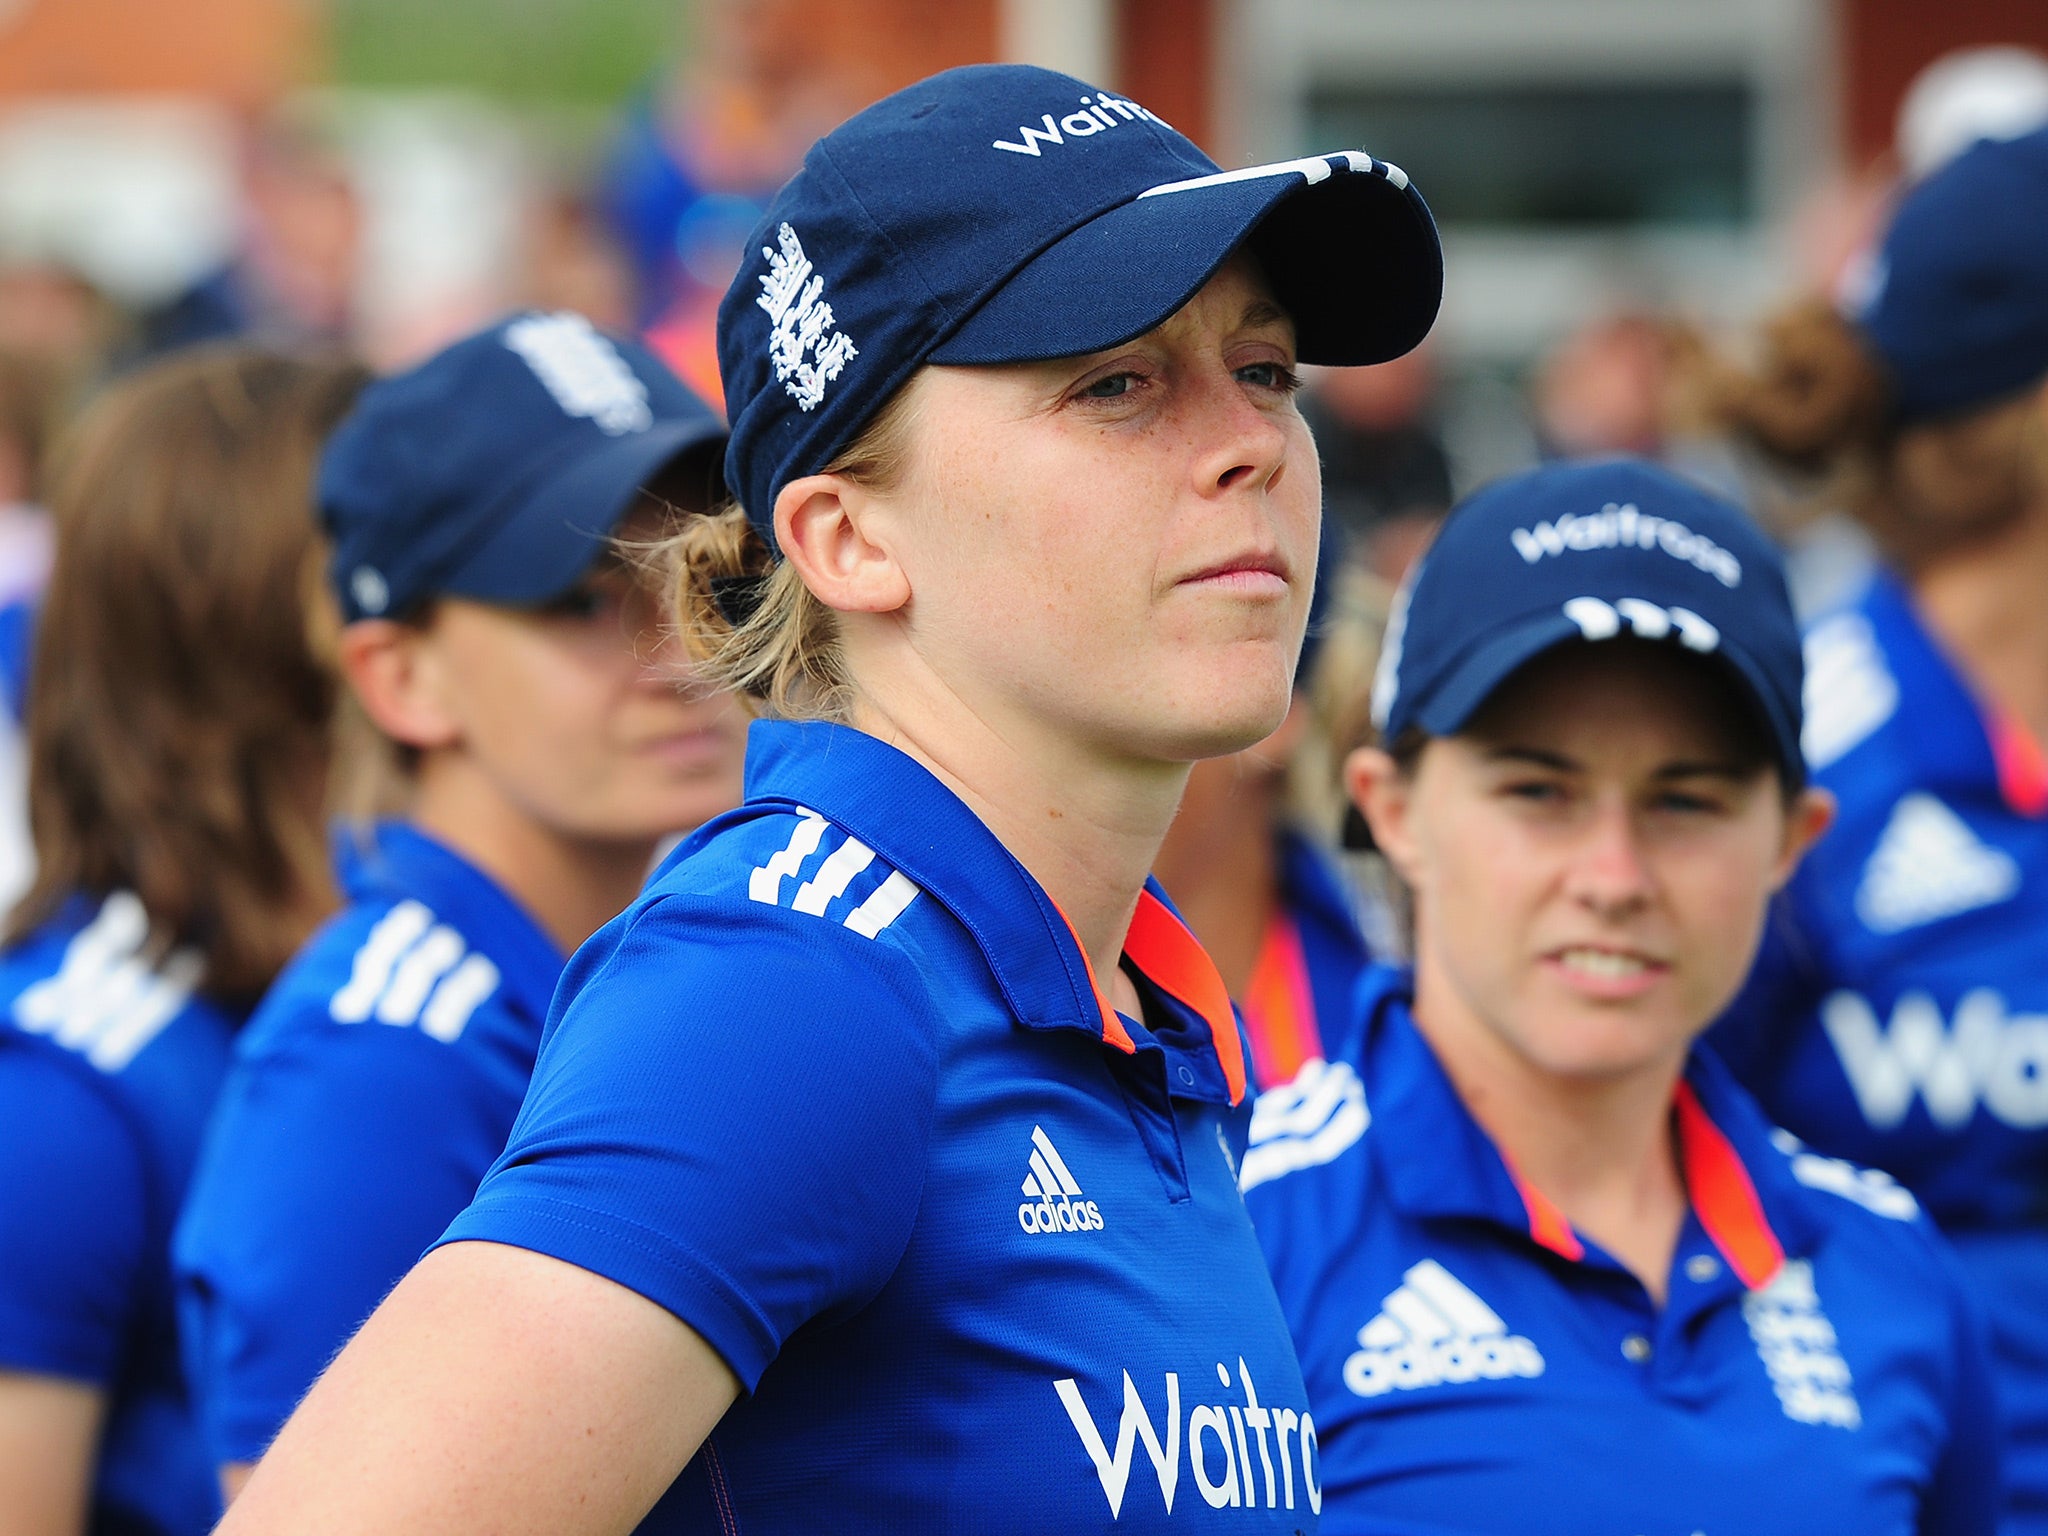 Heather Knight and England are aiming to realise their potential this summer